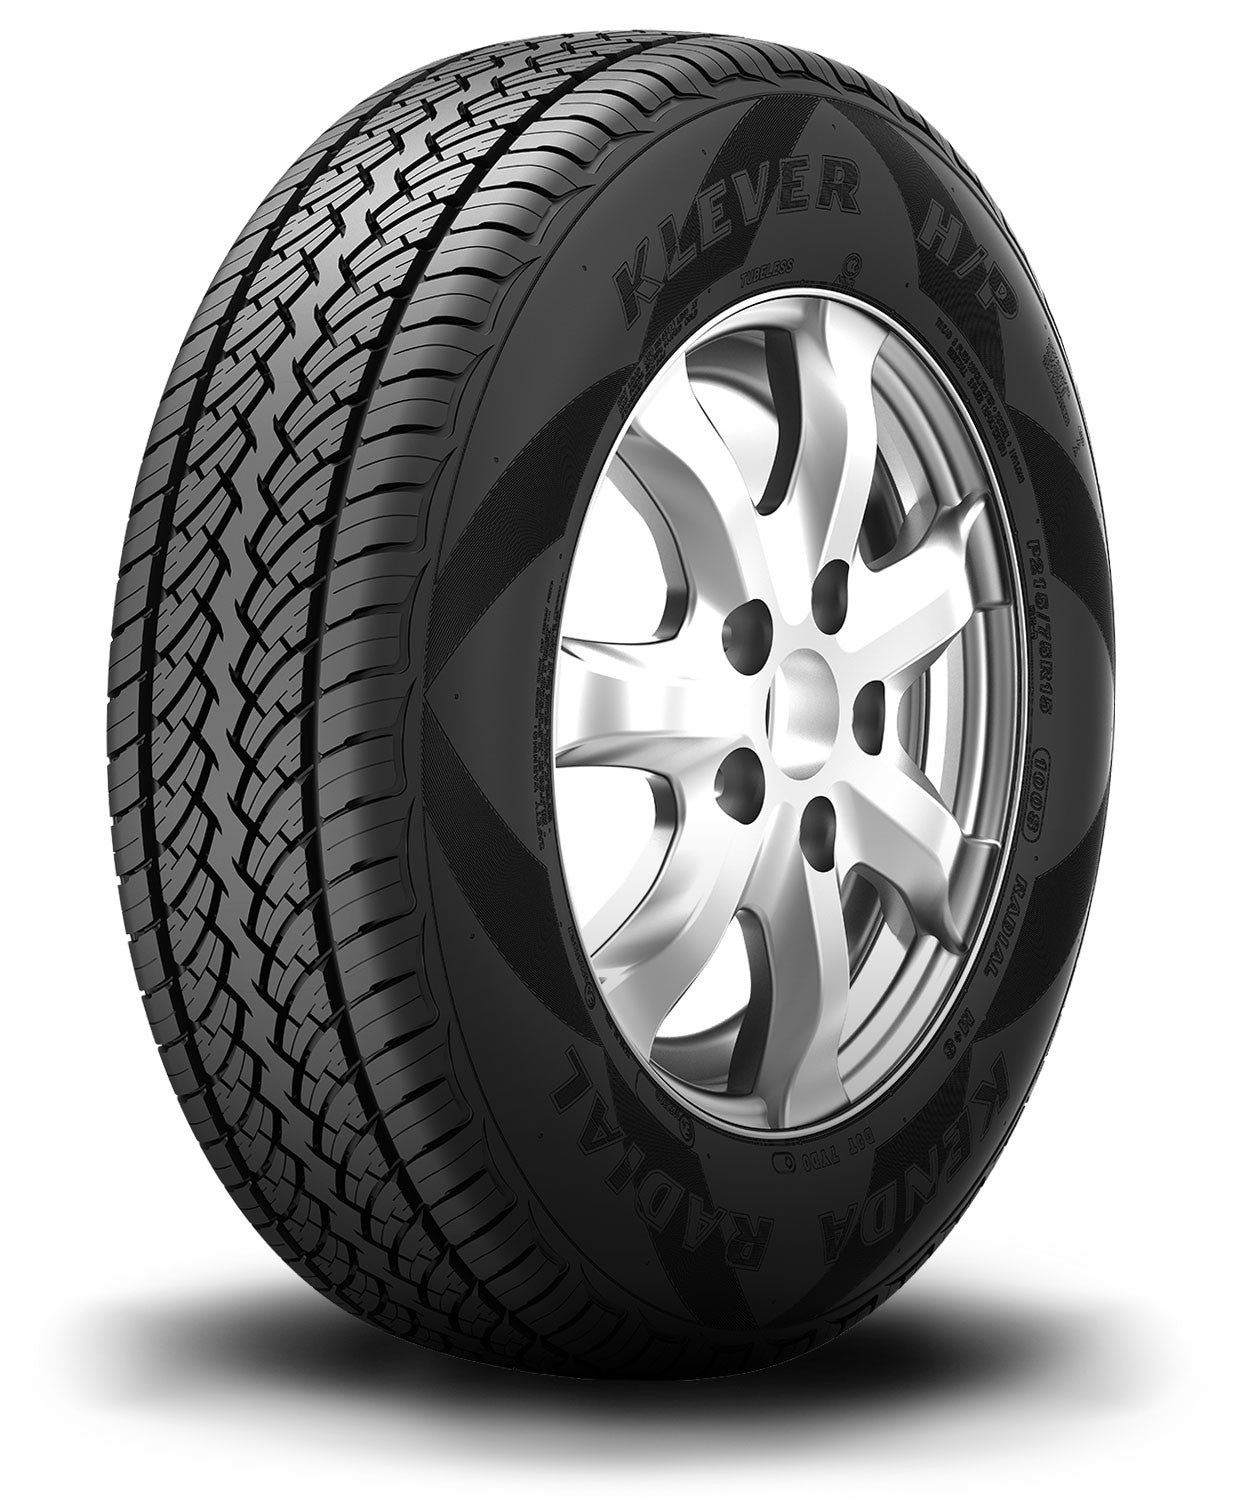 NEW 225/70R16 Kenda KLEVER HP KR15 103S BK - Tires and Engine Performance